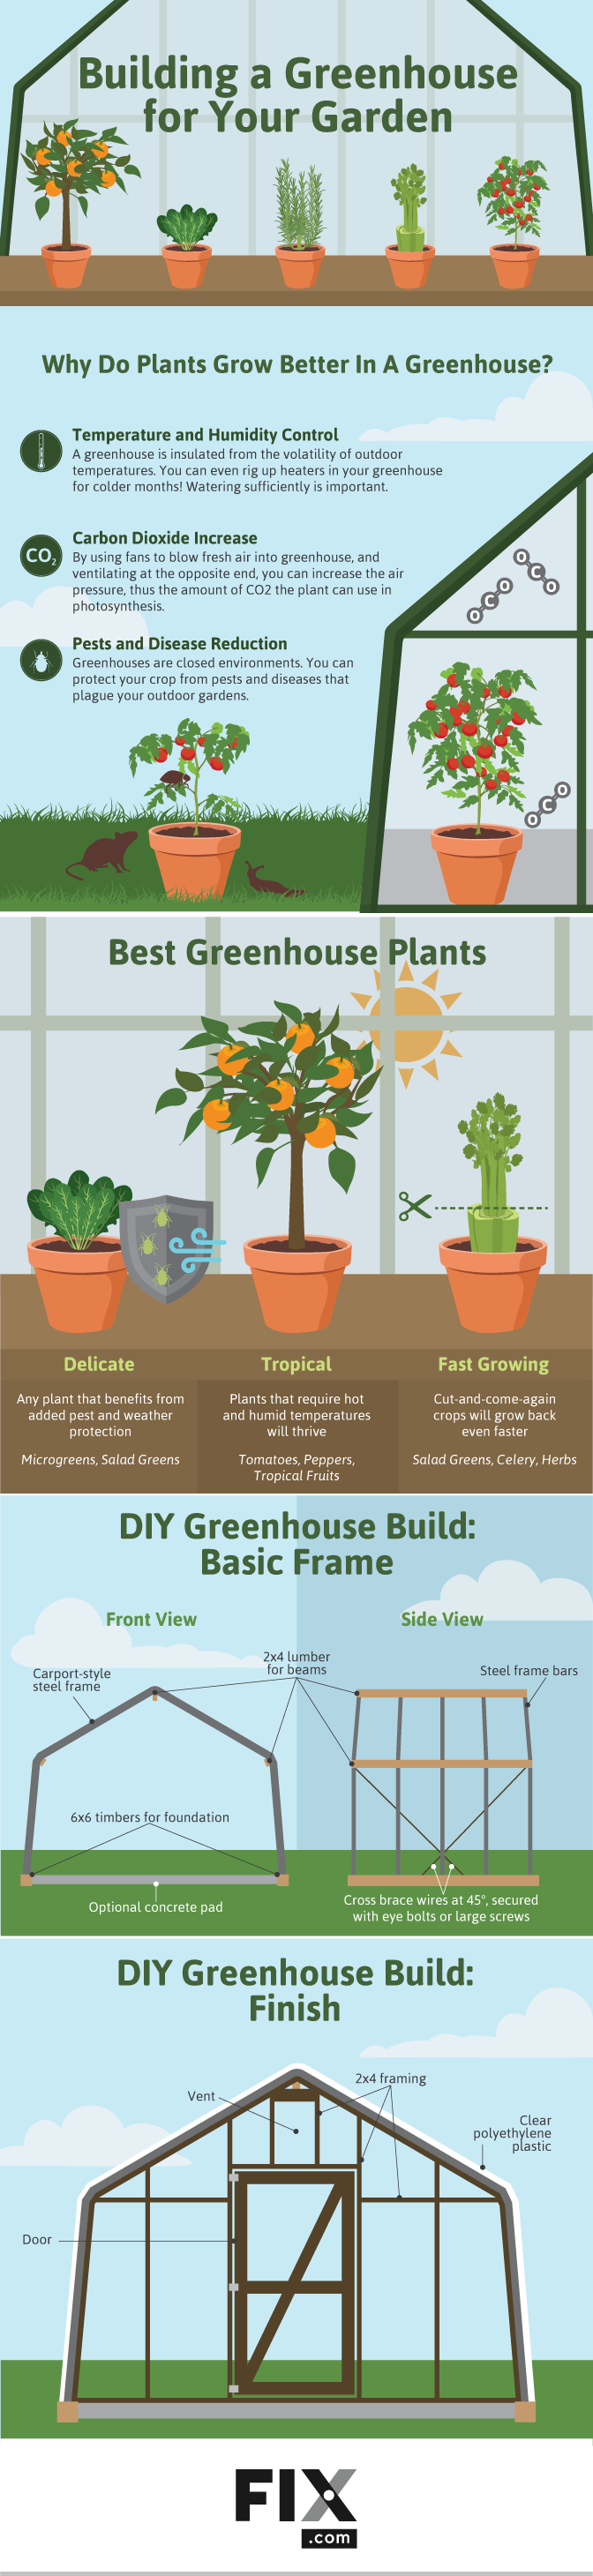 Building a Greenhouse for Your Garden #infographic